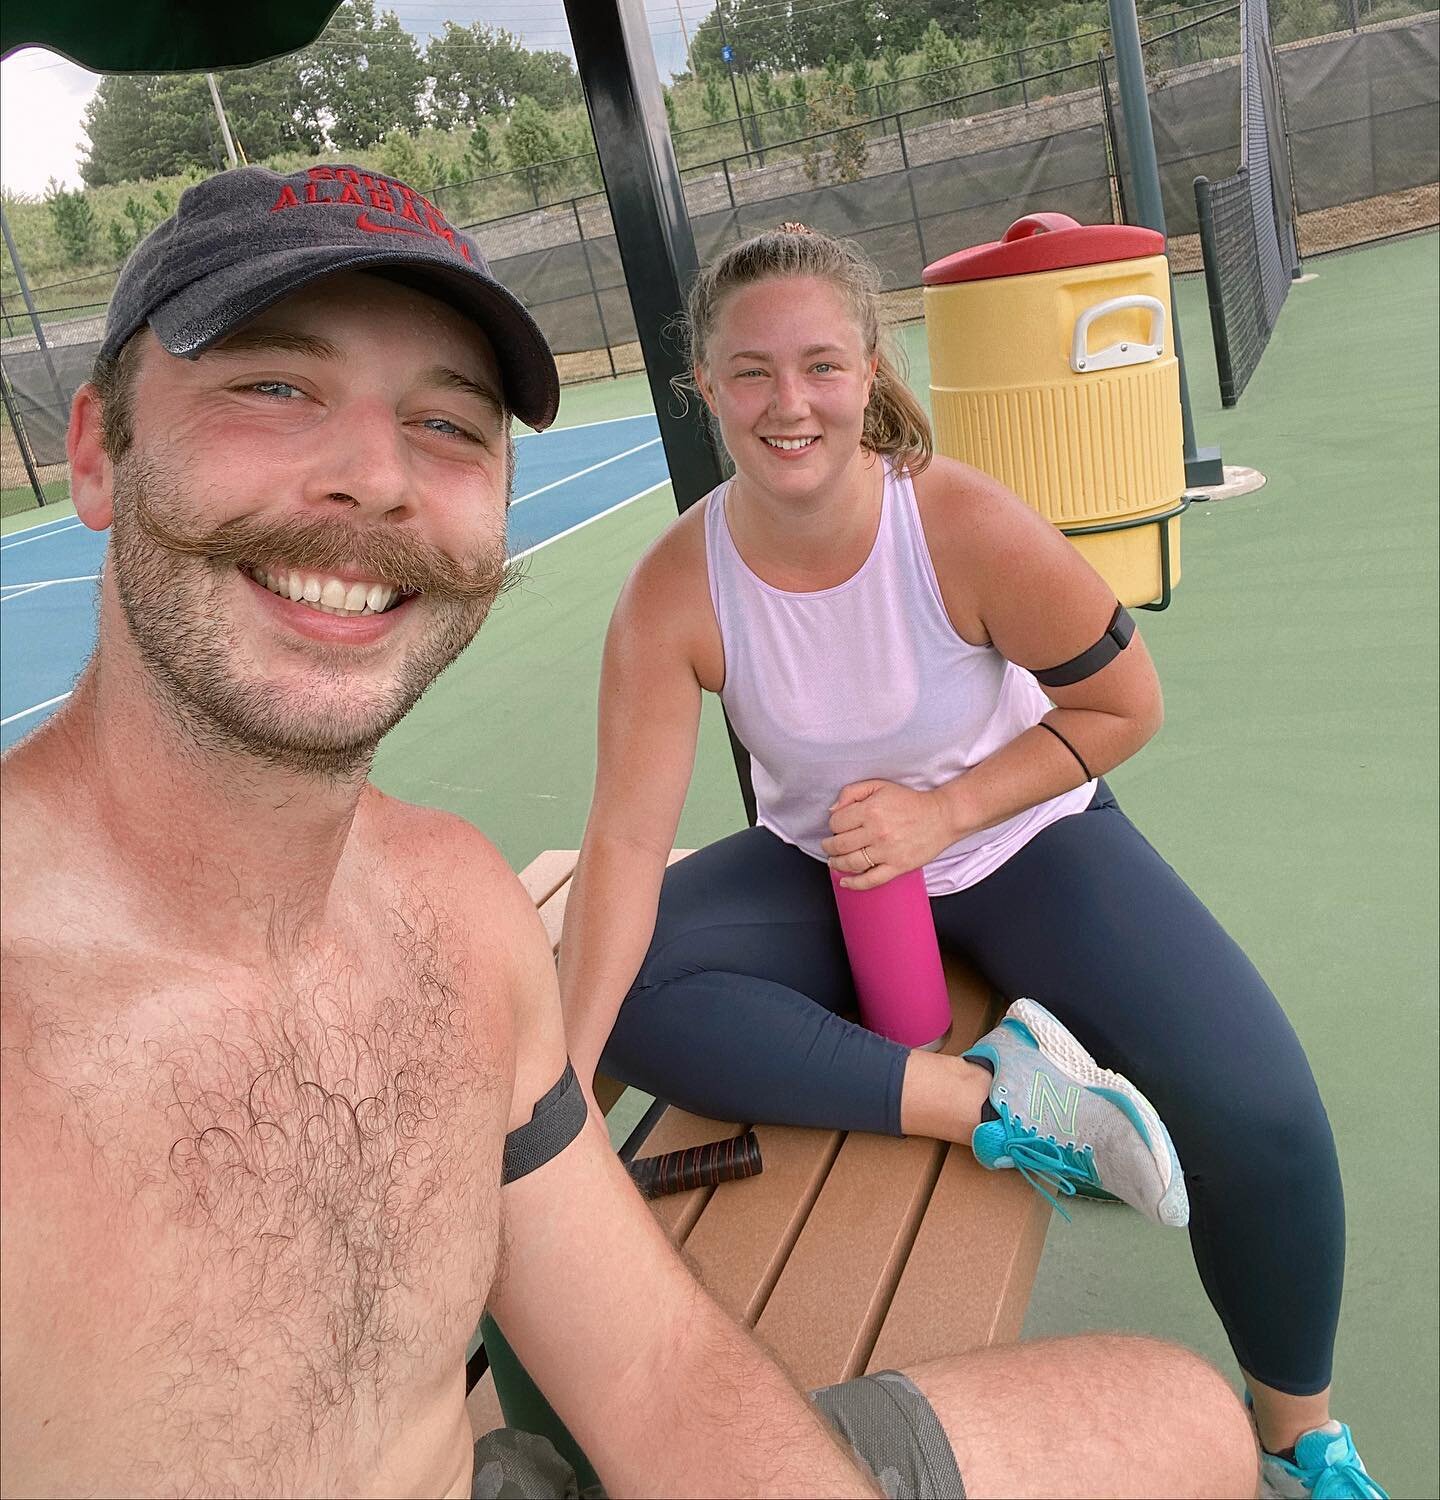 Fall means pickleball in our family 😝 We bought our pickleball gear in March of 2021&mdash;right before the start of all this Achilles stuff.

It feels so freakin great to get outside and be active together again. 🥰

Happy Saturday! 🍂

- yeah, the